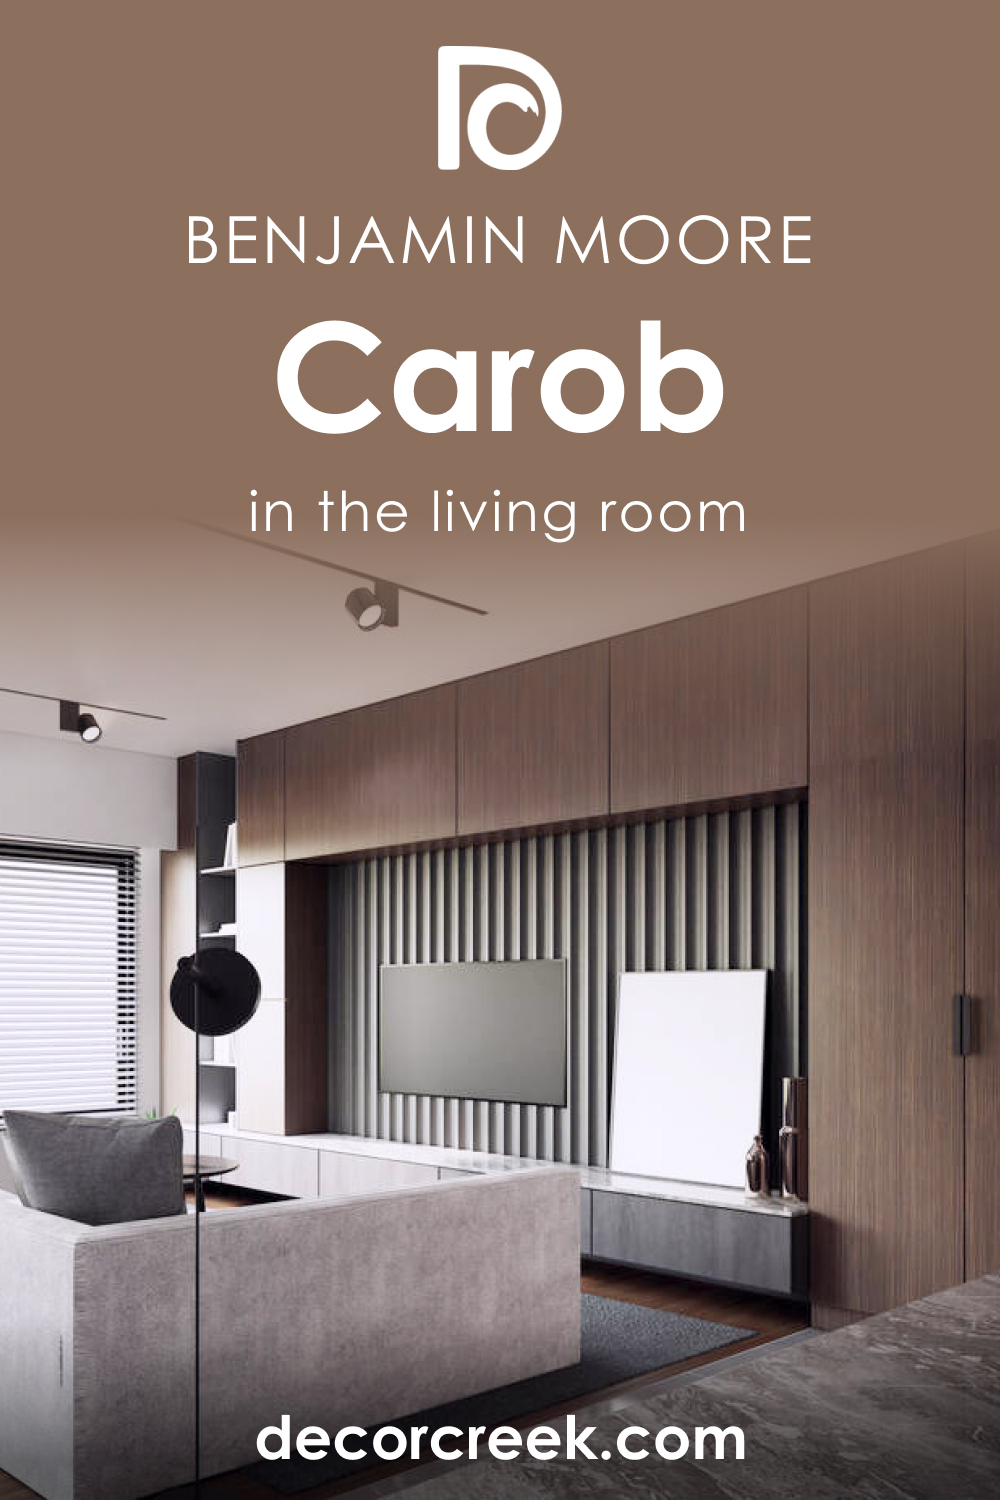 How to Use Carob AF-160 in the Living Room?